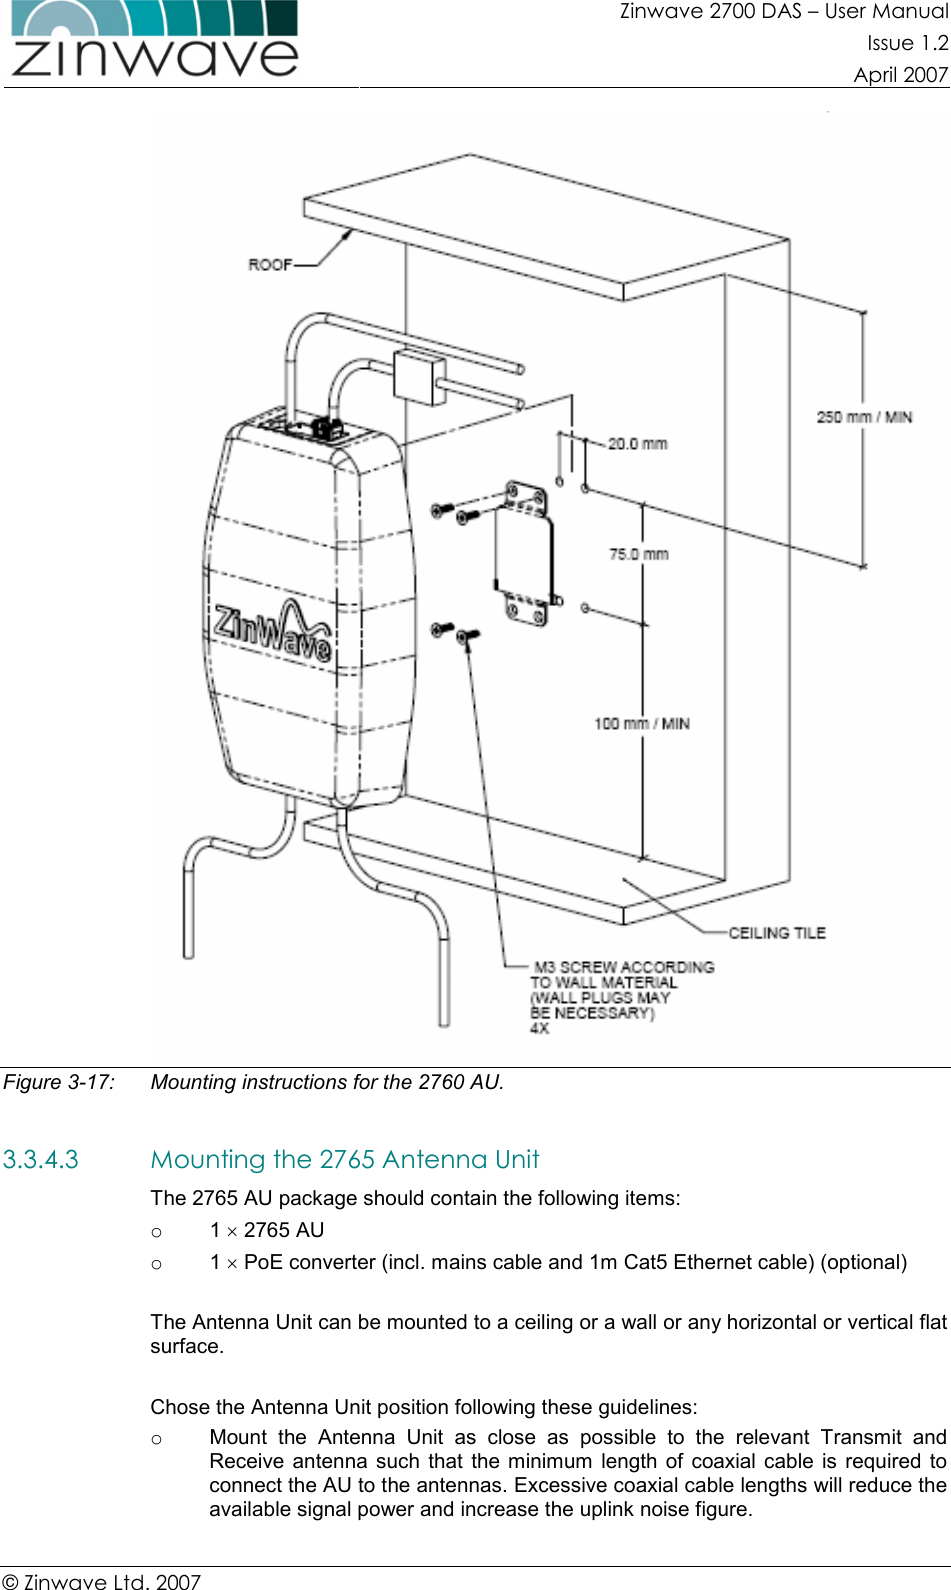 Zinwave 2700 DAS – User Manual Issue 1.2  April 2007  © Zinwave Ltd. 2007   Figure 3-17:   Mounting instructions for the 2760 AU.  3.3.4.3 Mounting the 2765 Antenna Unit The 2765 AU package should contain the following items: o  1 × 2765 AU o  1 × PoE converter (incl. mains cable and 1m Cat5 Ethernet cable) (optional)  The Antenna Unit can be mounted to a ceiling or a wall or any horizontal or vertical flat surface.  Chose the Antenna Unit position following these guidelines: o  Mount  the  Antenna  Unit  as  close  as  possible  to  the  relevant  Transmit  and Receive  antenna  such  that  the minimum  length of  coaxial cable  is  required  to connect the AU to the antennas. Excessive coaxial cable lengths will reduce the available signal power and increase the uplink noise figure. 